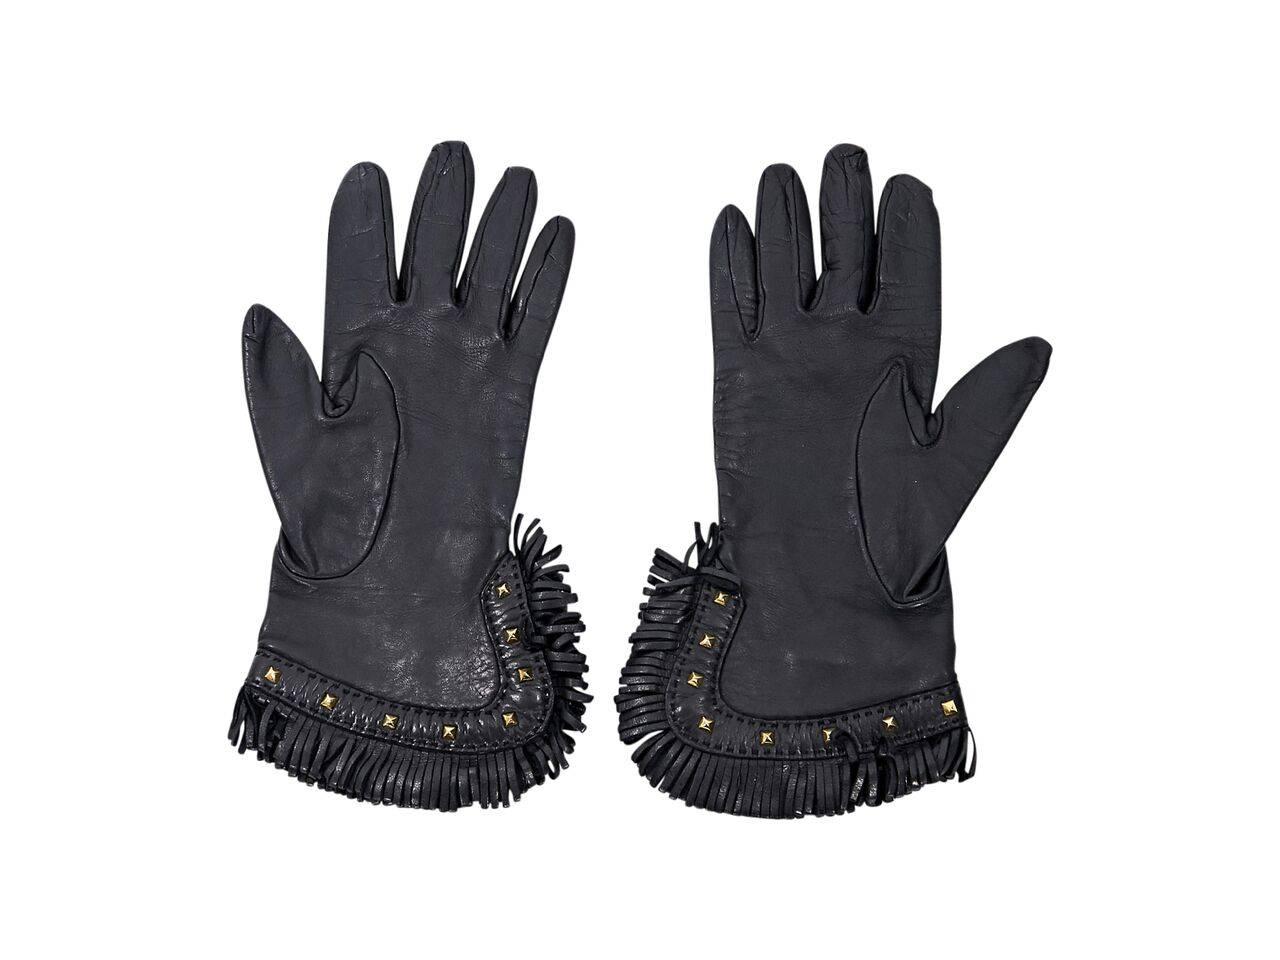 Product details:  Black leather gloves by Hermes.  Side slit.  Fringed cuffs with studded trim.  Goldtone hardware.  Size 7.
Condition: Pre-owned. Very good.
Est. Retail $ 970.00